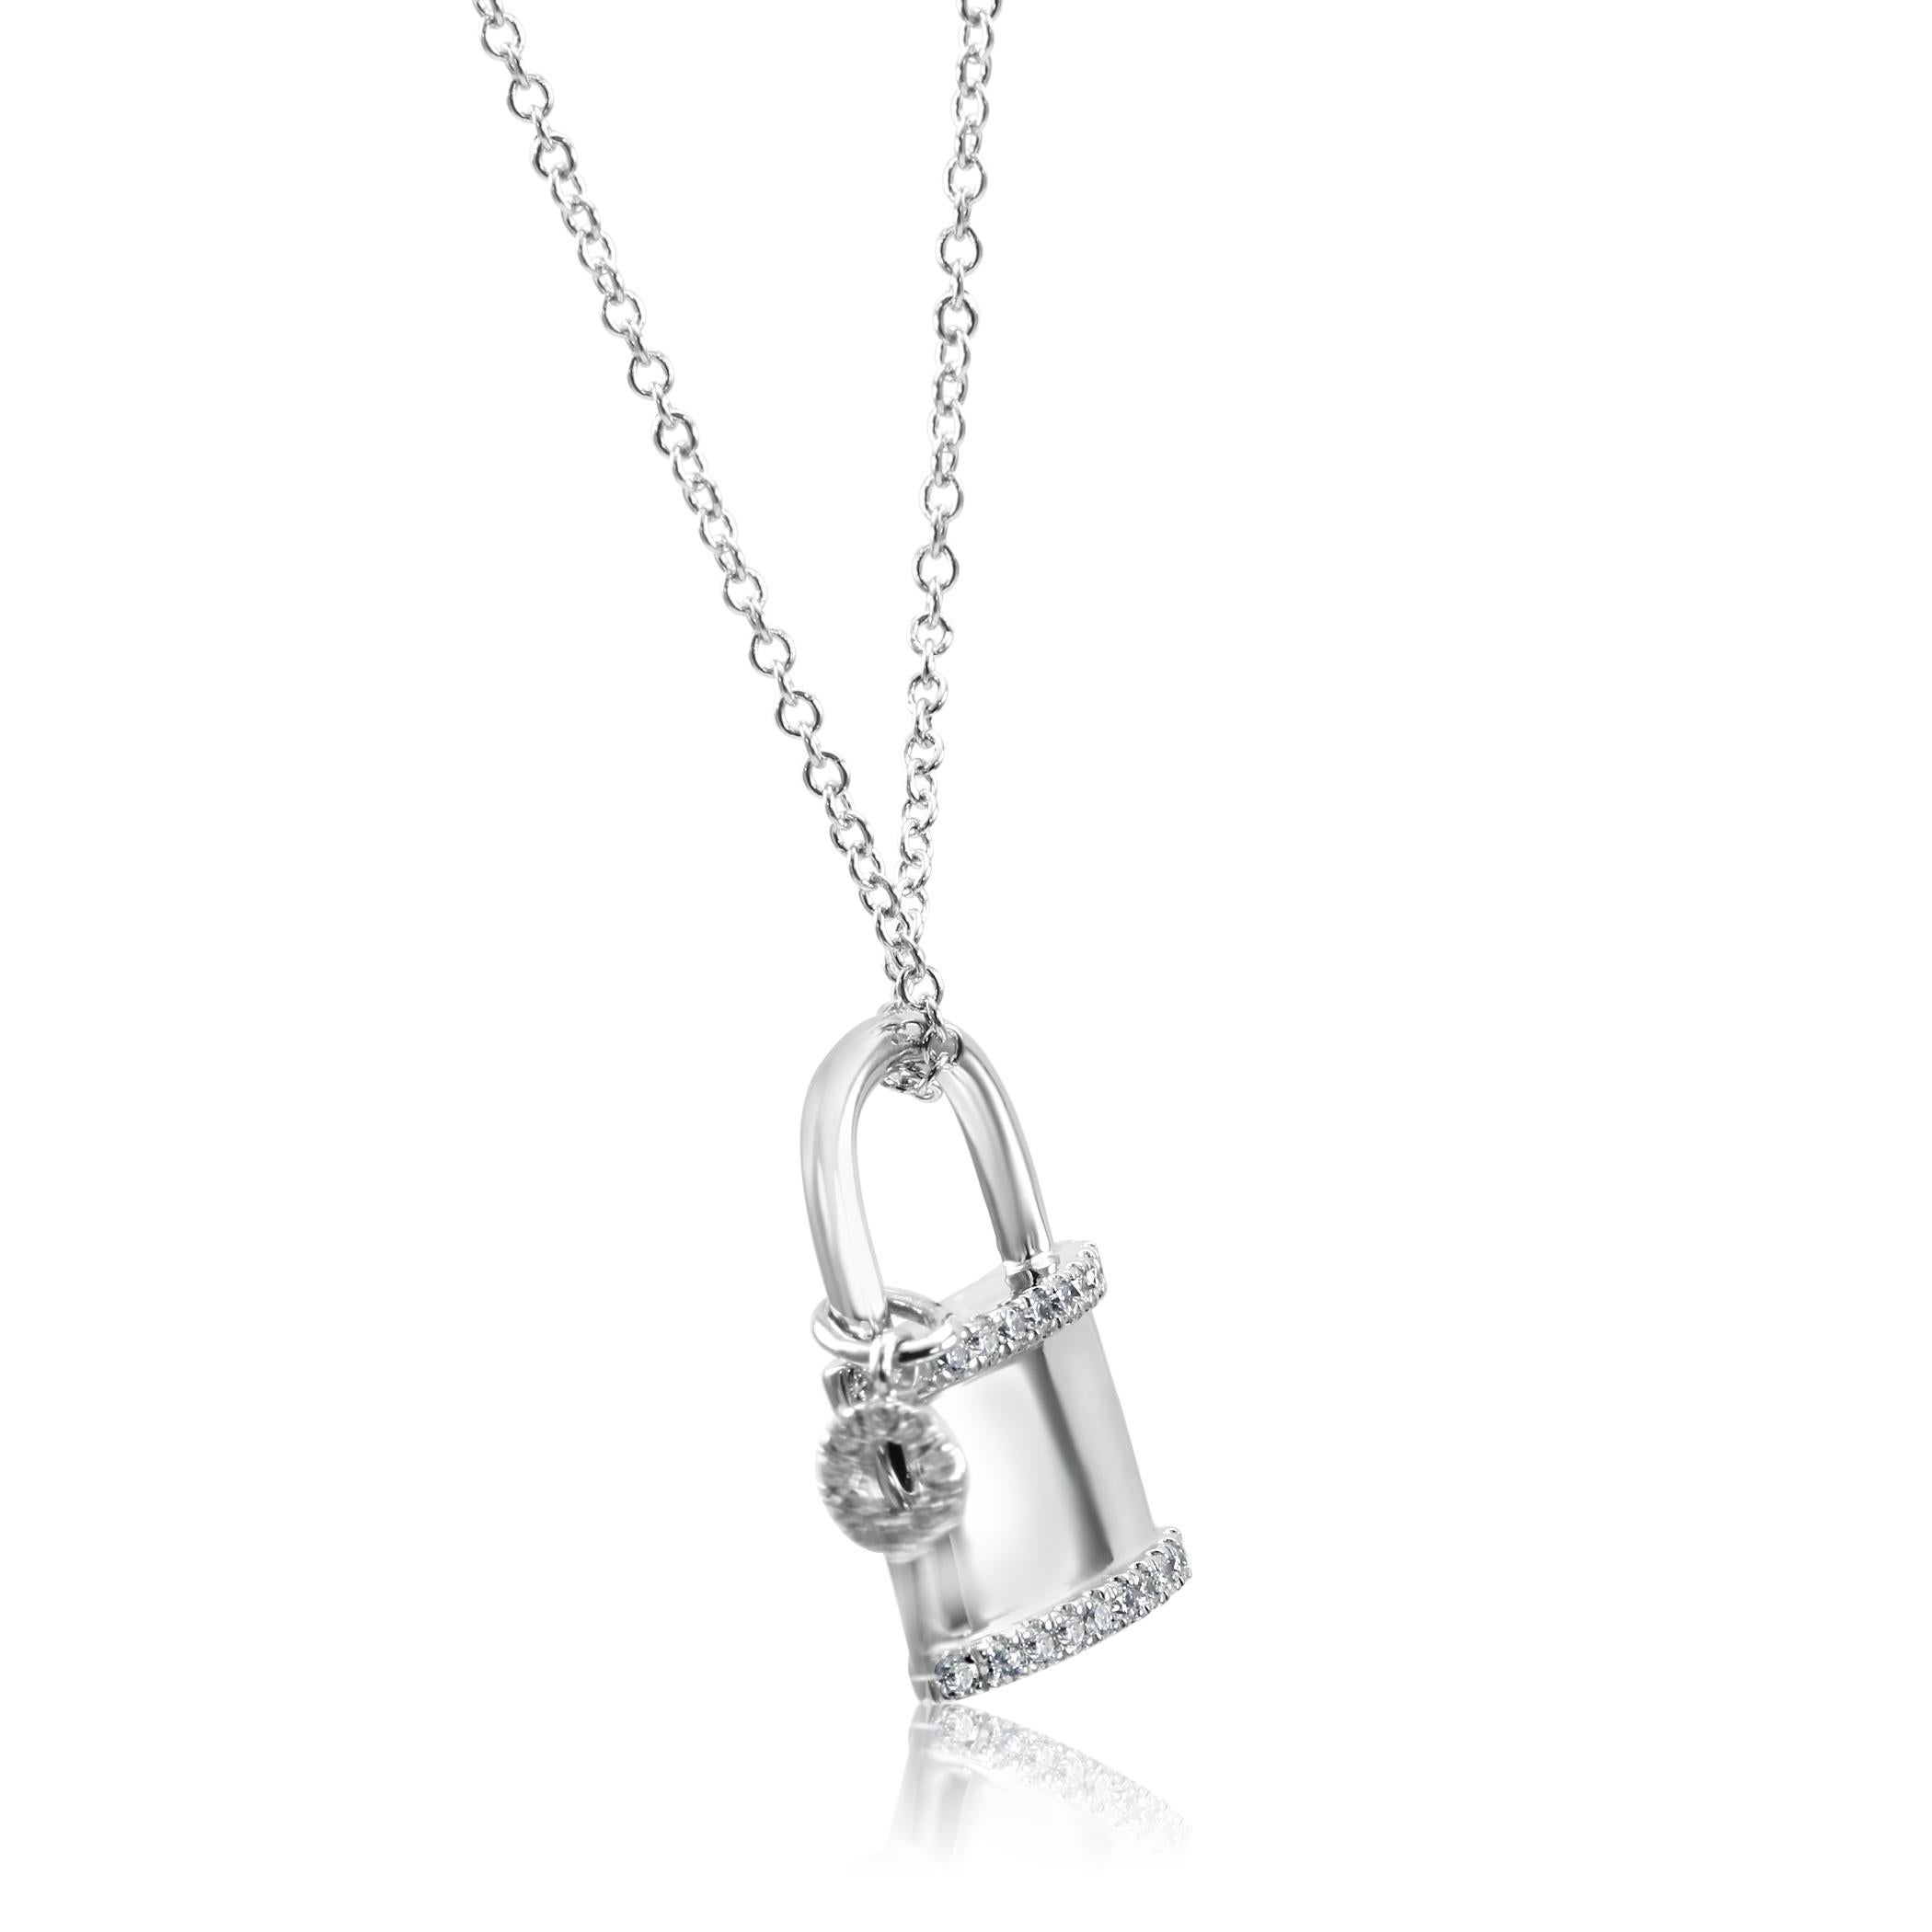 31 White G-H Color SI Diamond Round 0.18 Carat set in Lock and Key Style Fashion Drop Pendant Chain Necklace in 14K White Gold. 

Total Diamond Weight: 0.18 Carat

Metal: 14k White Gold

Pendant Measurements: Width 0.75 Inch Length 0.5 Inch

Chain